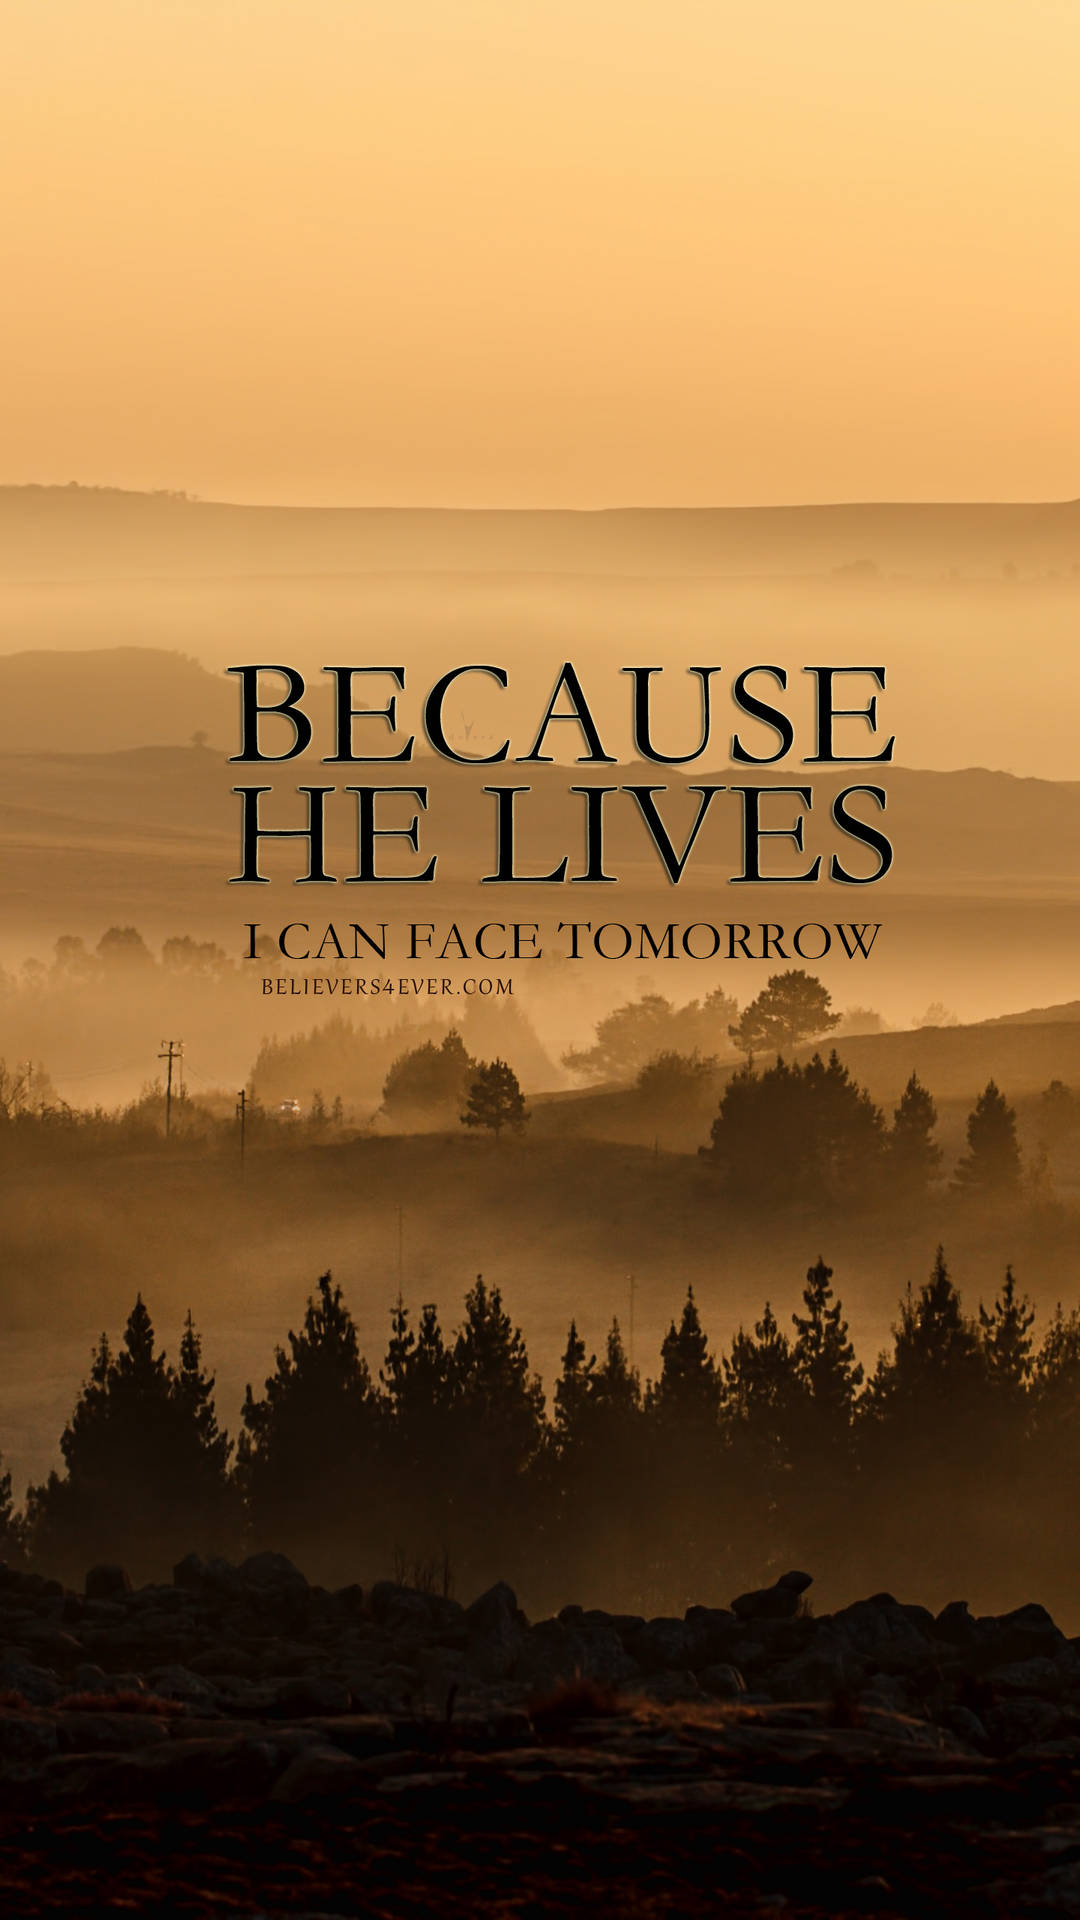 Because He Lives Christian Inspirational Quote Wallpaper